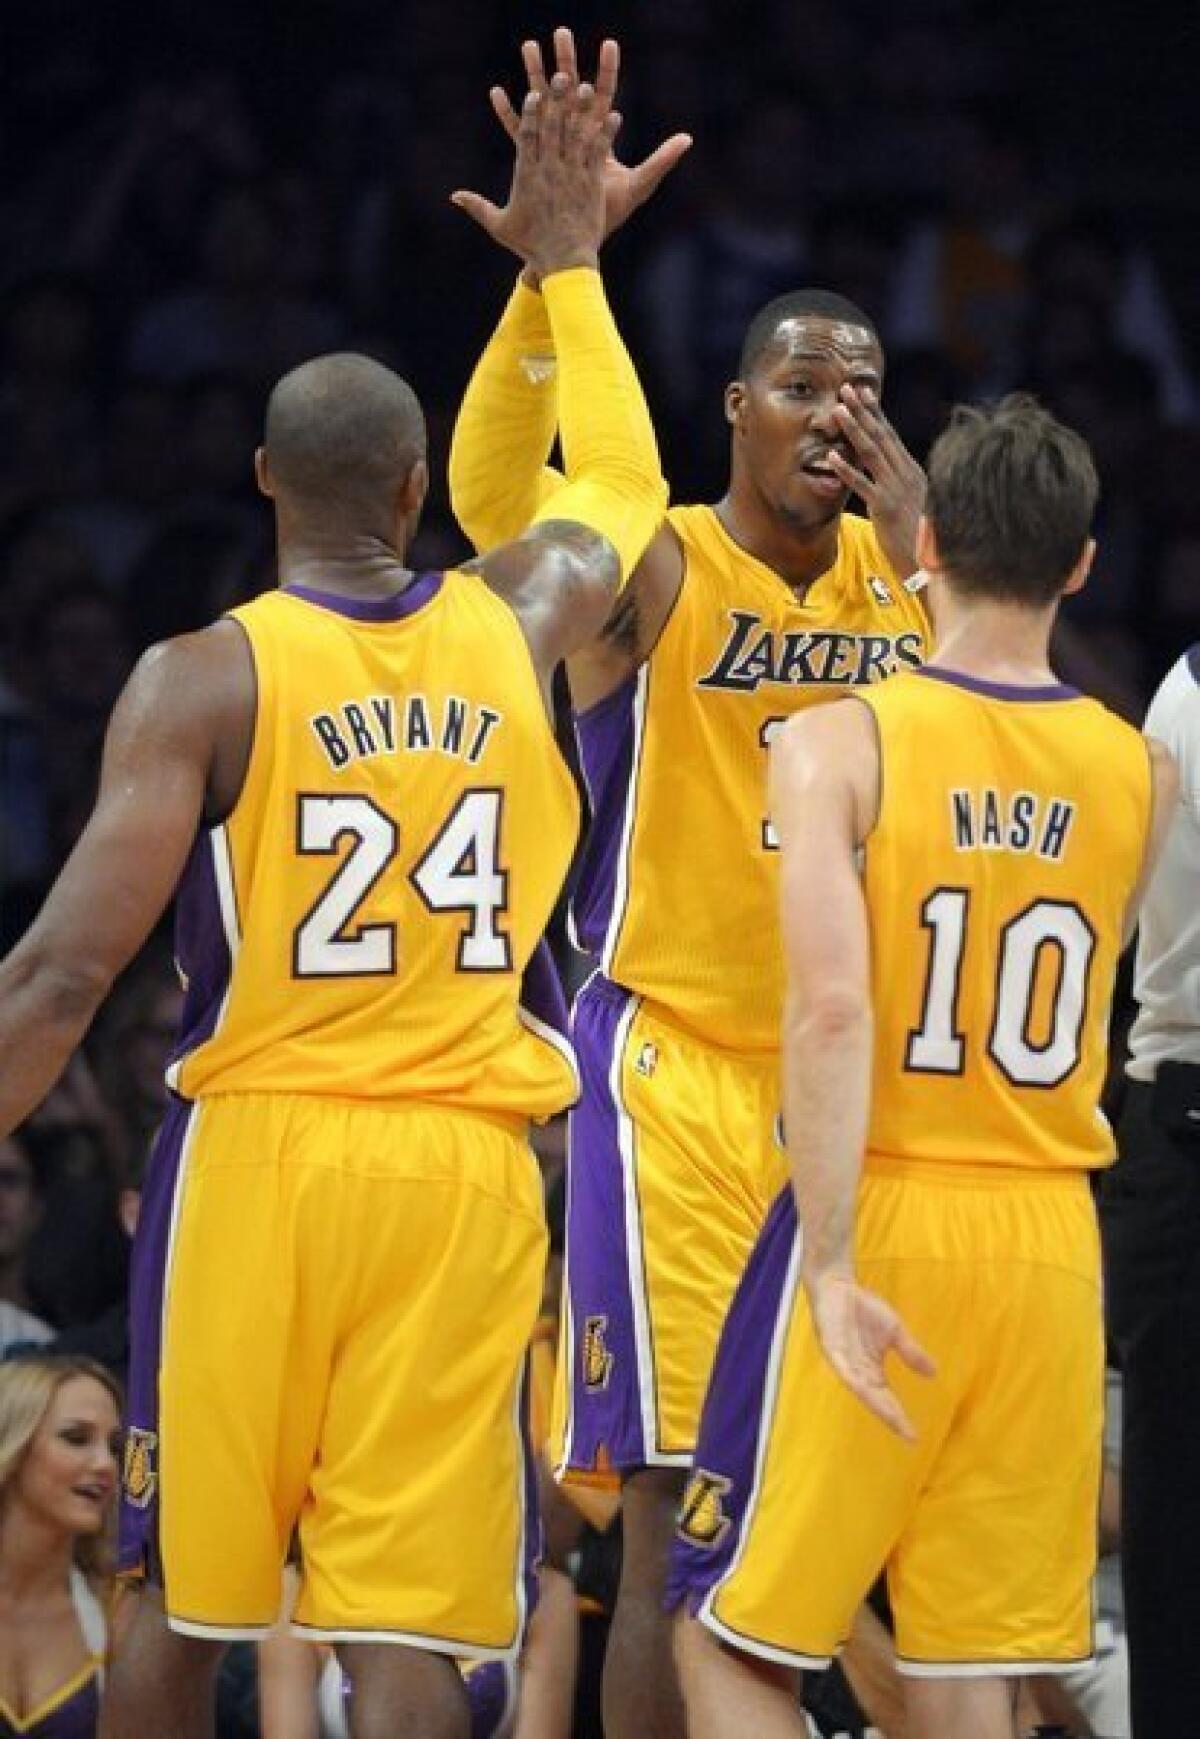 Three Lakers -- Kobe Bryant, Dwight Howard and Steve Nash -- made the NBA's biannual list of bestselling jerseys.